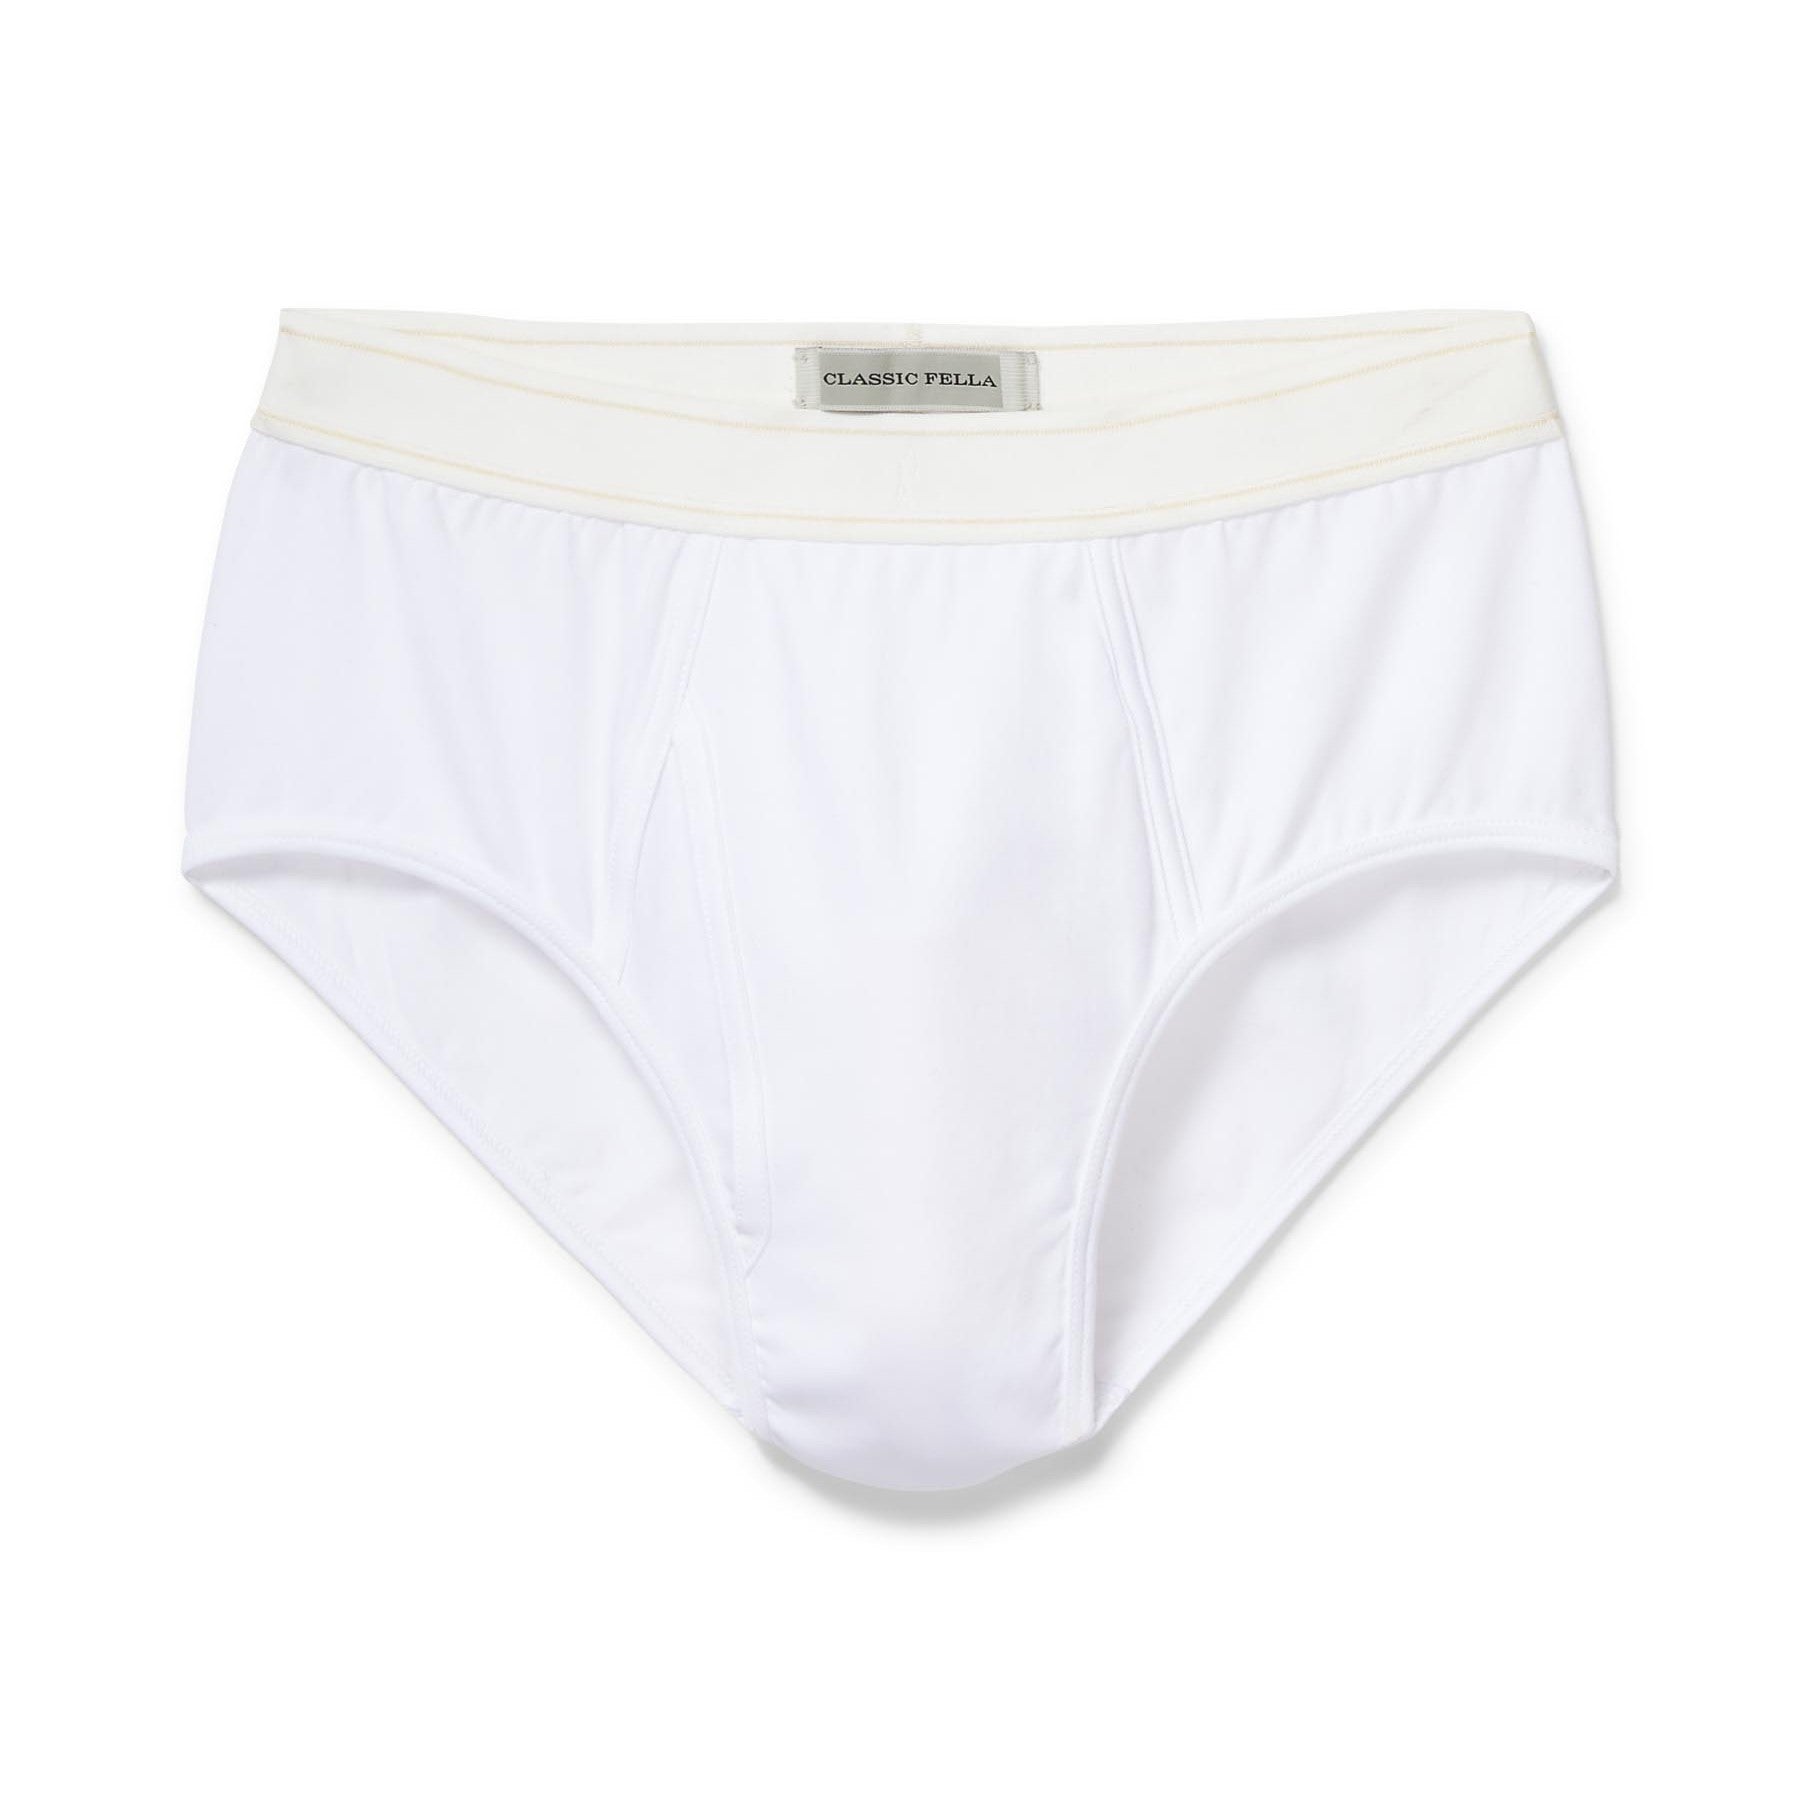 [ The Archer ] Week 44 : Men's Briefs and the Flys that Make Them